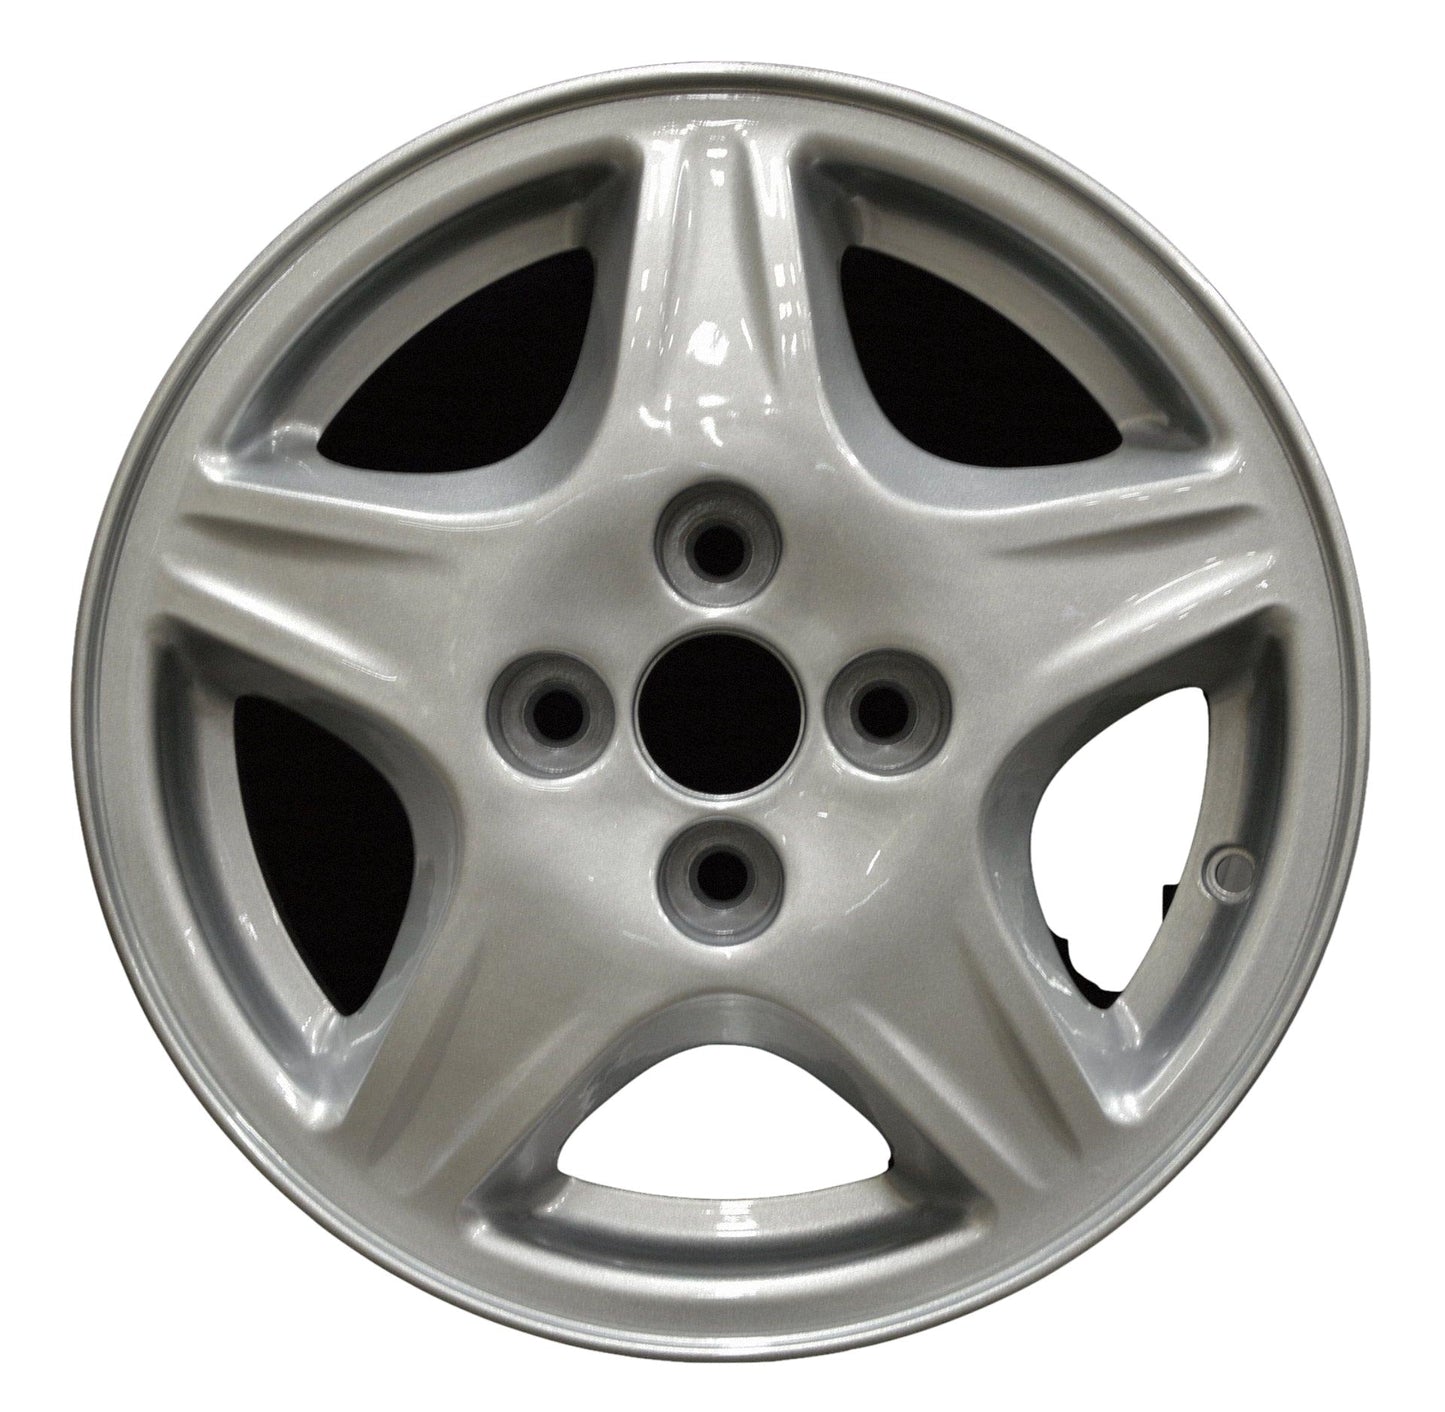 Ford Escort  1998, 1999 Factory OEM Car Wheel Size 14x5.5 Alloy WAO.3479.PS02.FF